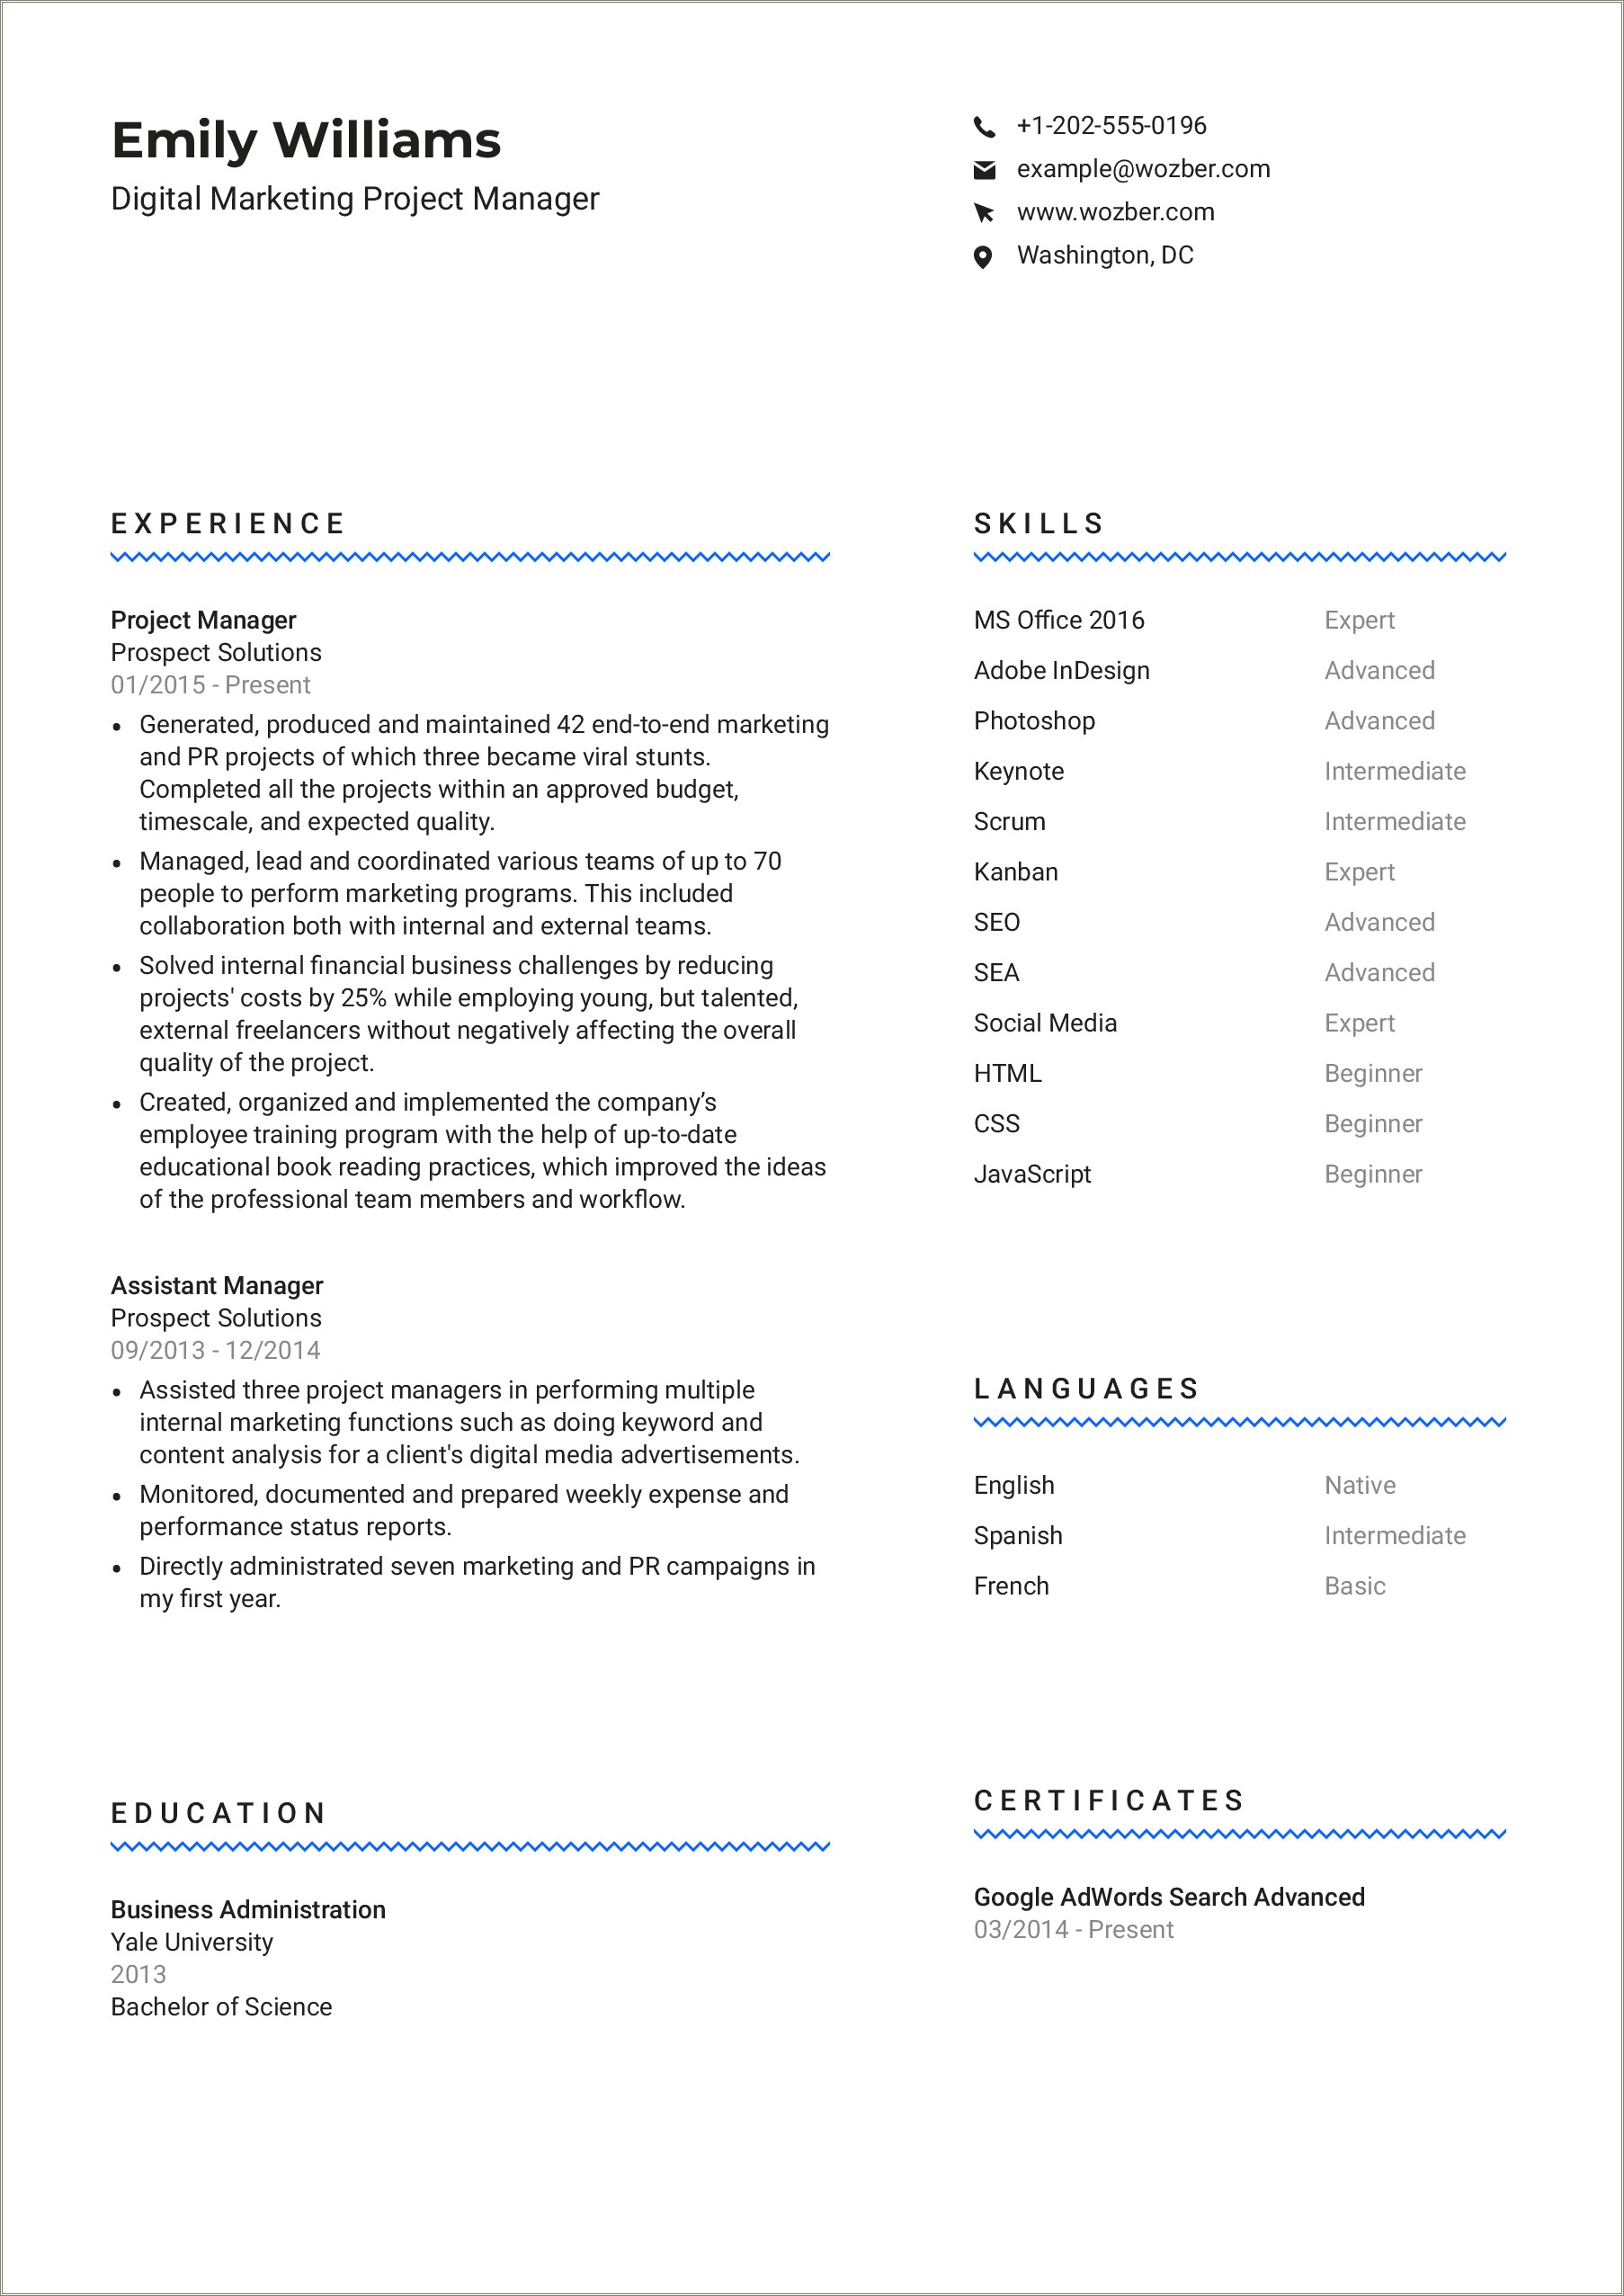 Free Resume Templates No Need To Sign Up